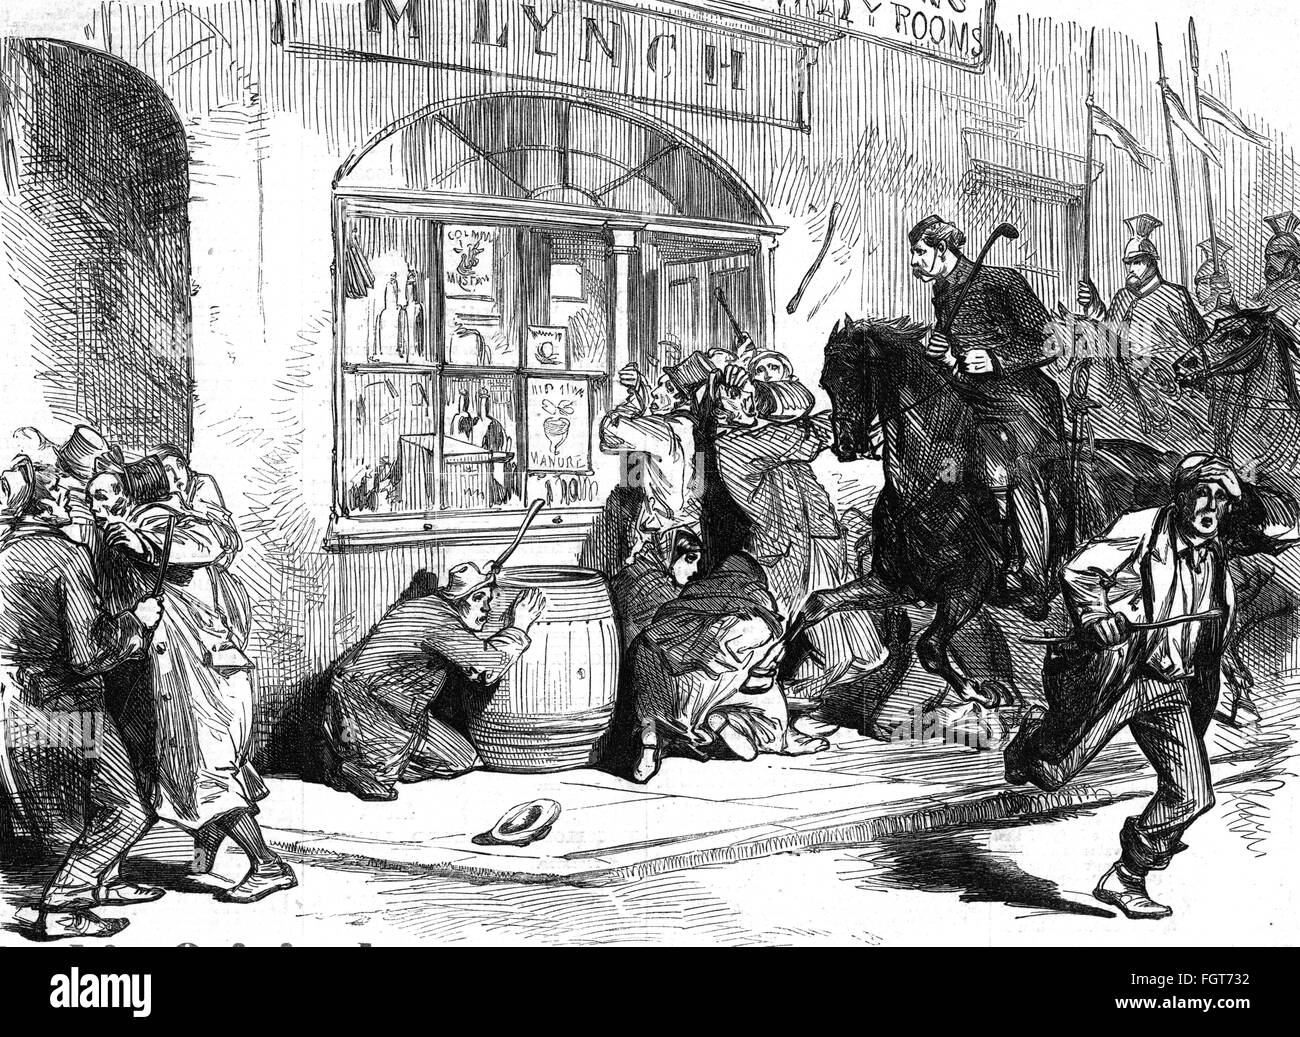 politics, elections, Great Britain, 1870, bye-election for the British parliament in the constituency of Longford, Ireland, riot, lancers are clearing the street in Granard, wood engraving, 'The Illustrated London News', 26.5.1870, Additional-Rights-Clearences-Not Available Stock Photo